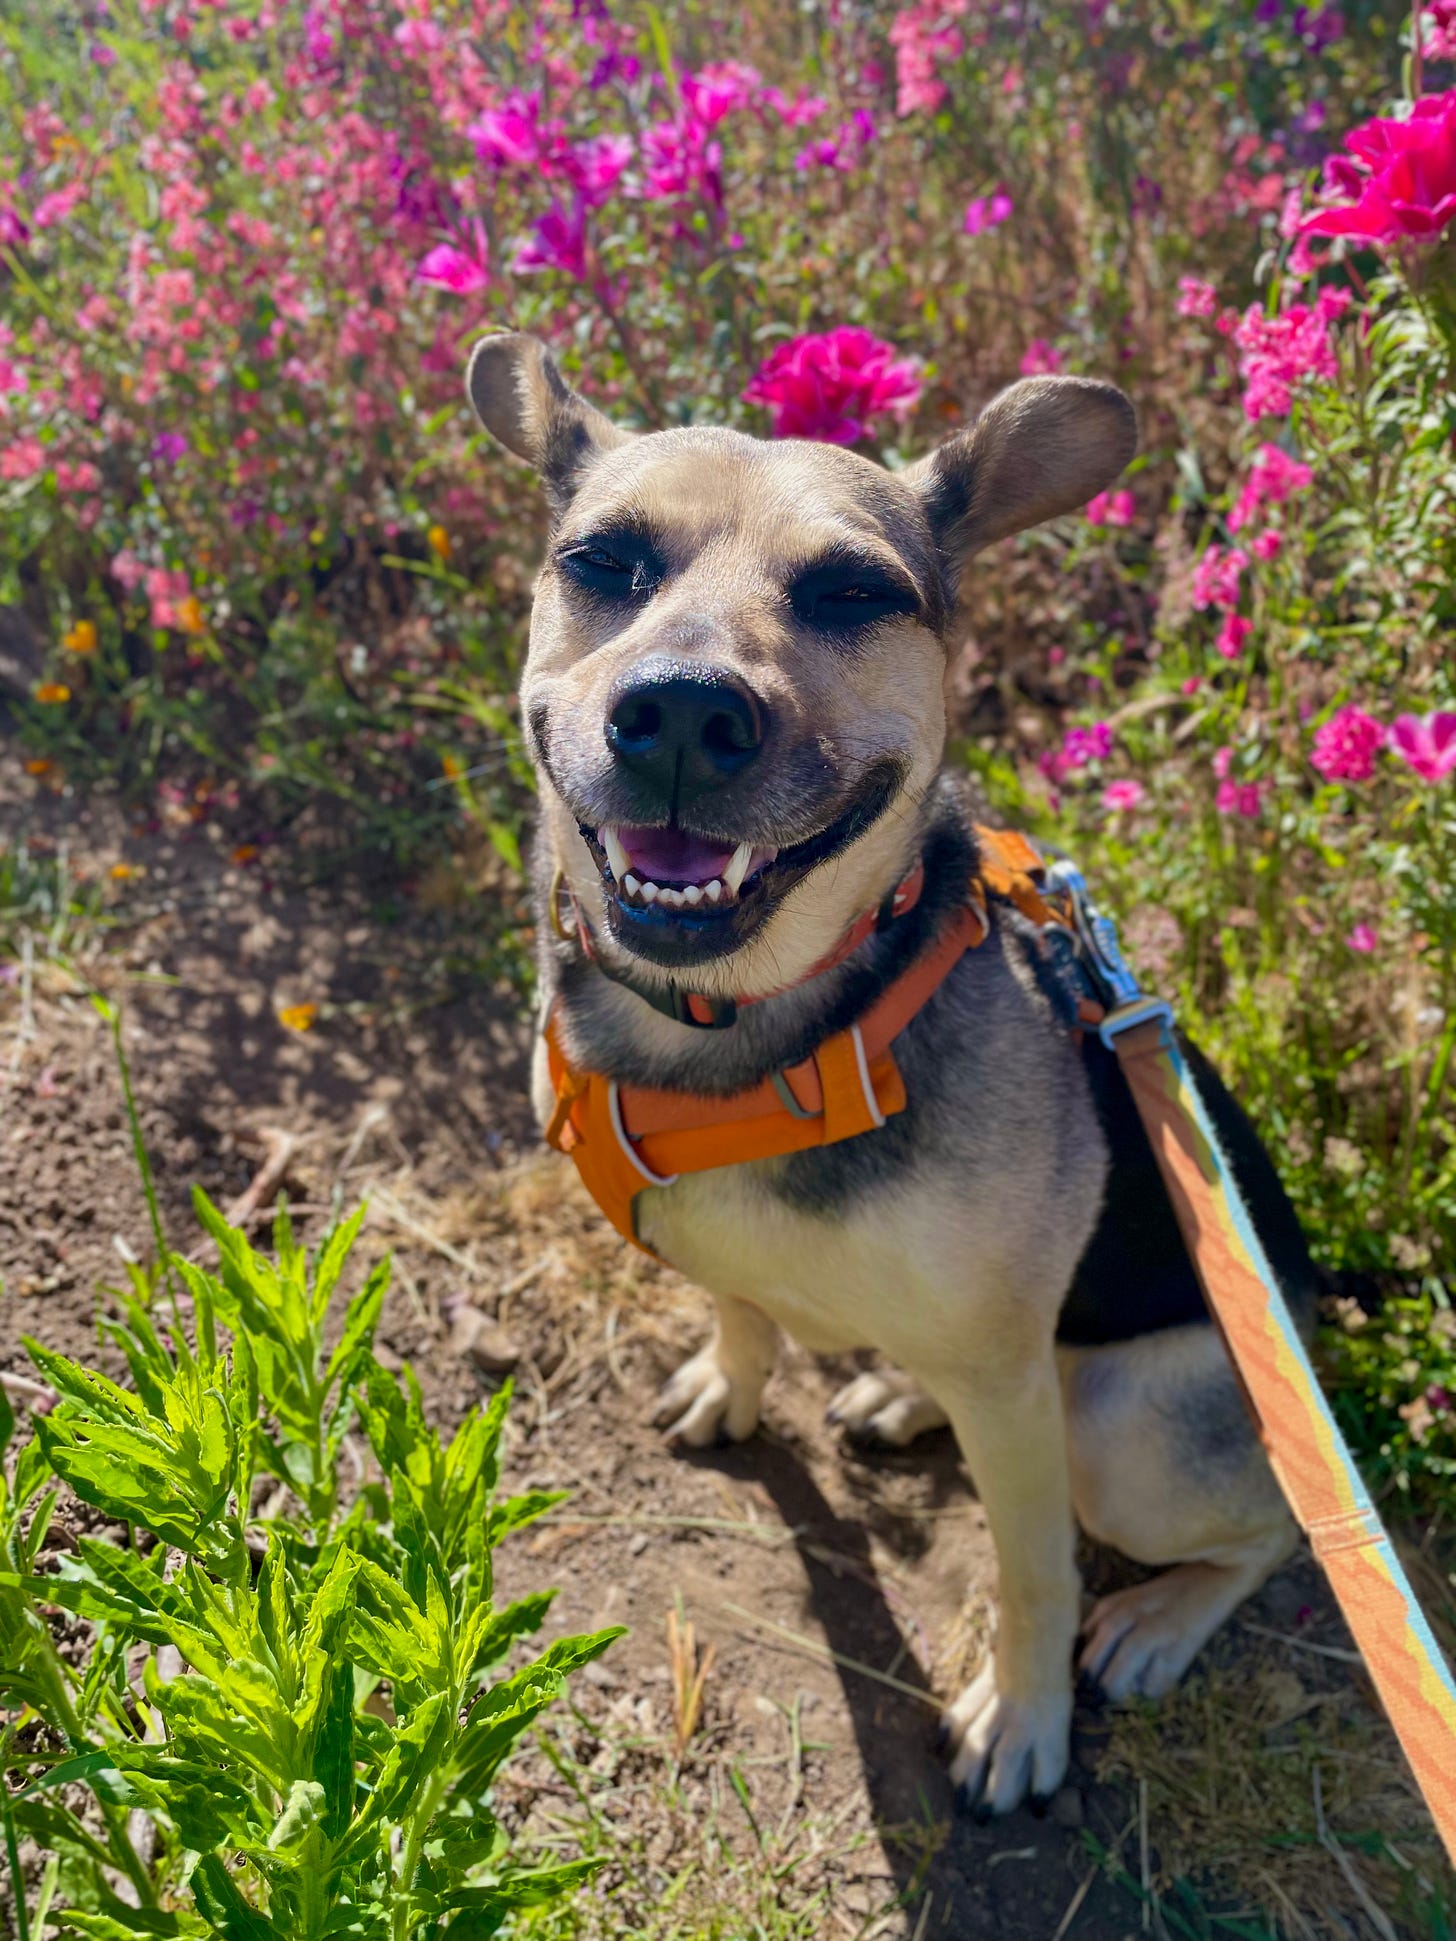 Dog smiling in front of flowers